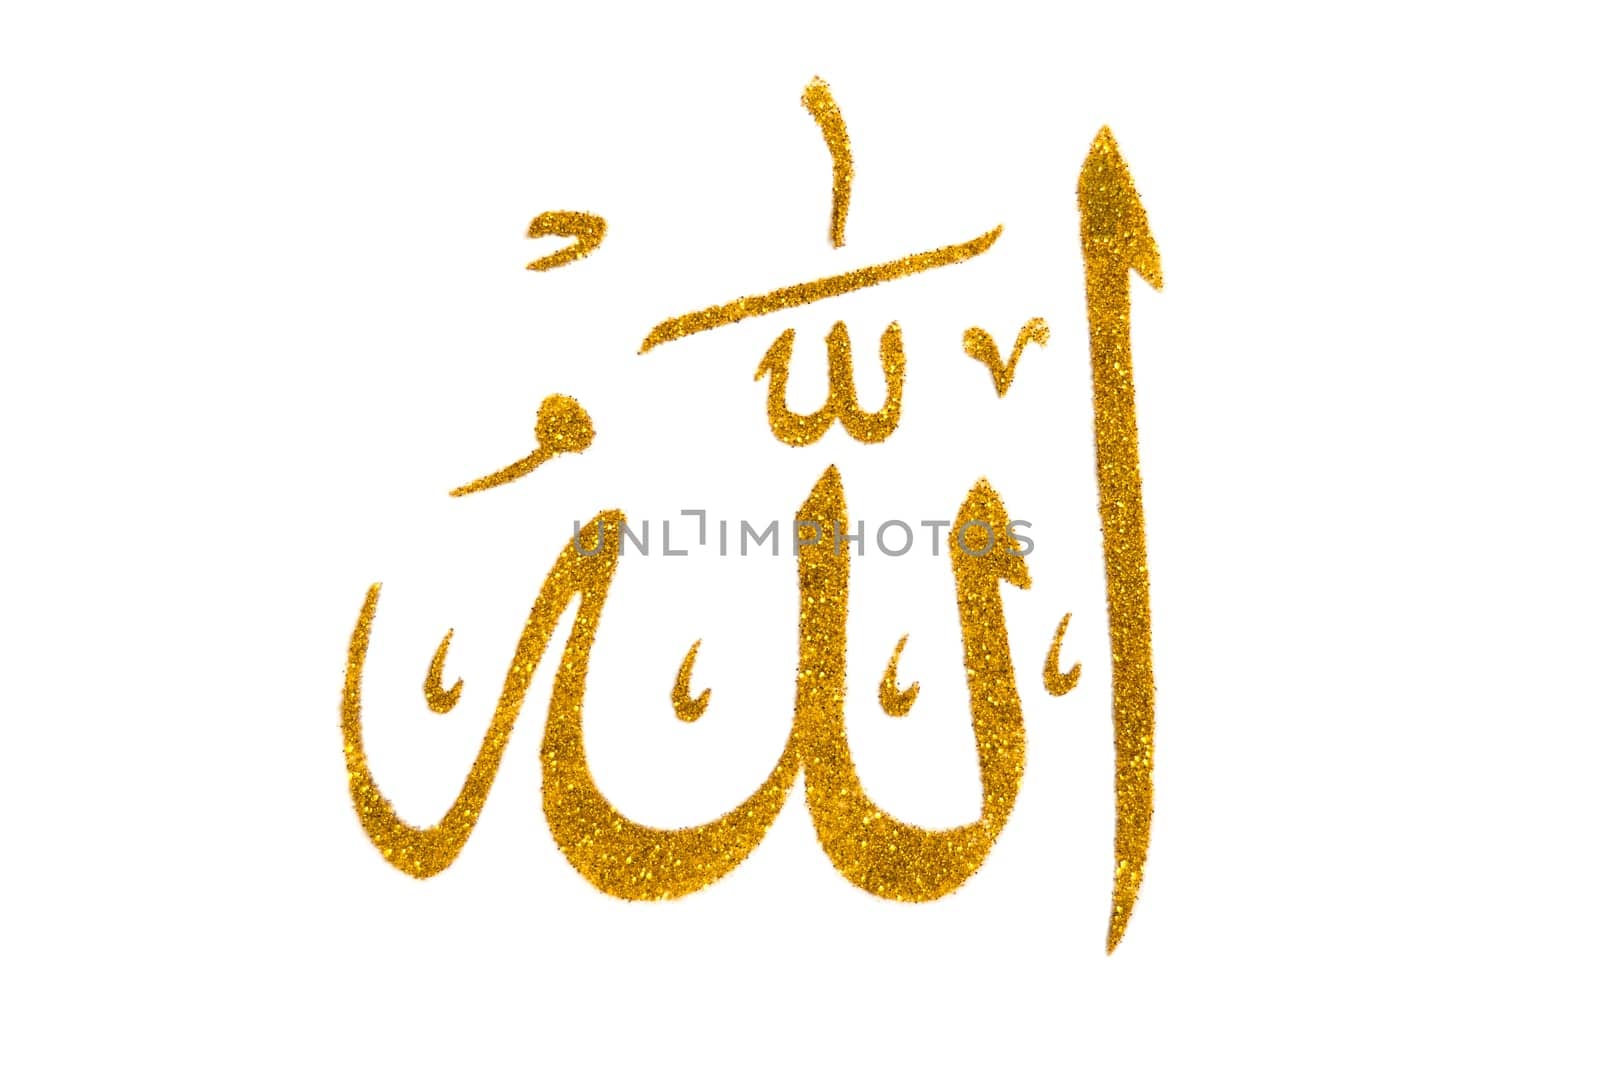 Allah bismillah names writen by glitter. Golden and shiny calligraphy of islam god. Isolated on white, top view